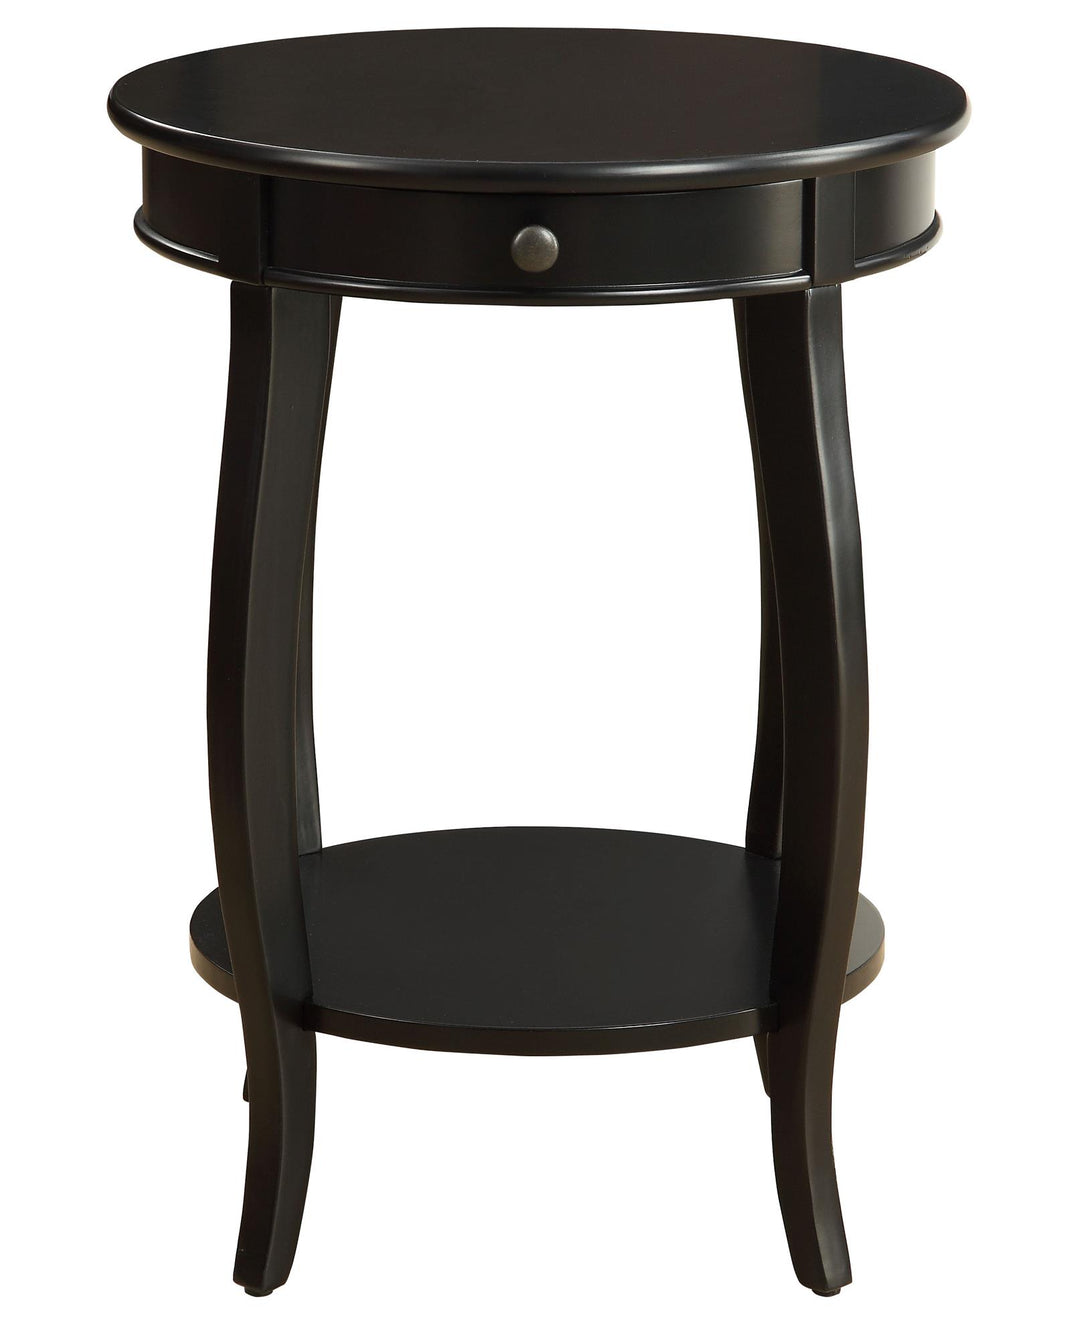 End Table with Lower Shelf and Drawer - Black